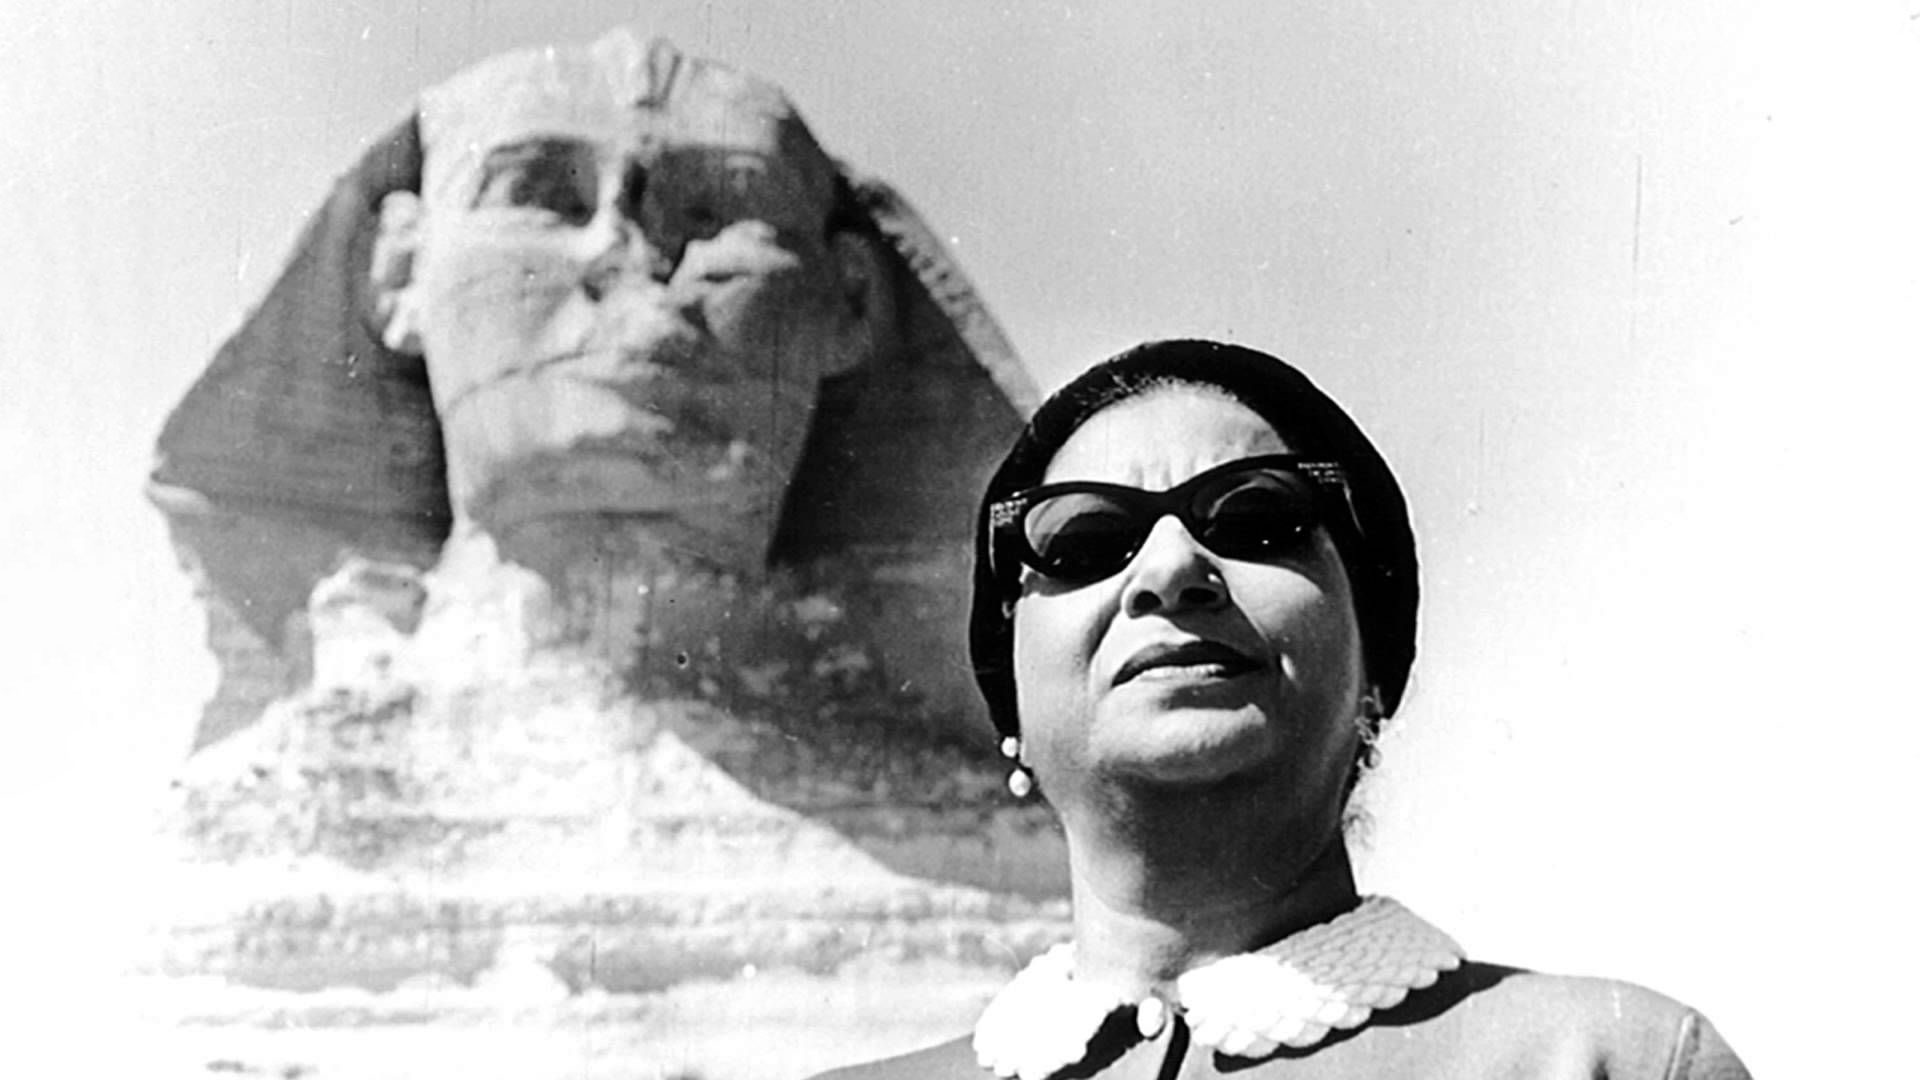 Vintage photo of woman with glasses poses in front of an image of the Sphinx in Egypt